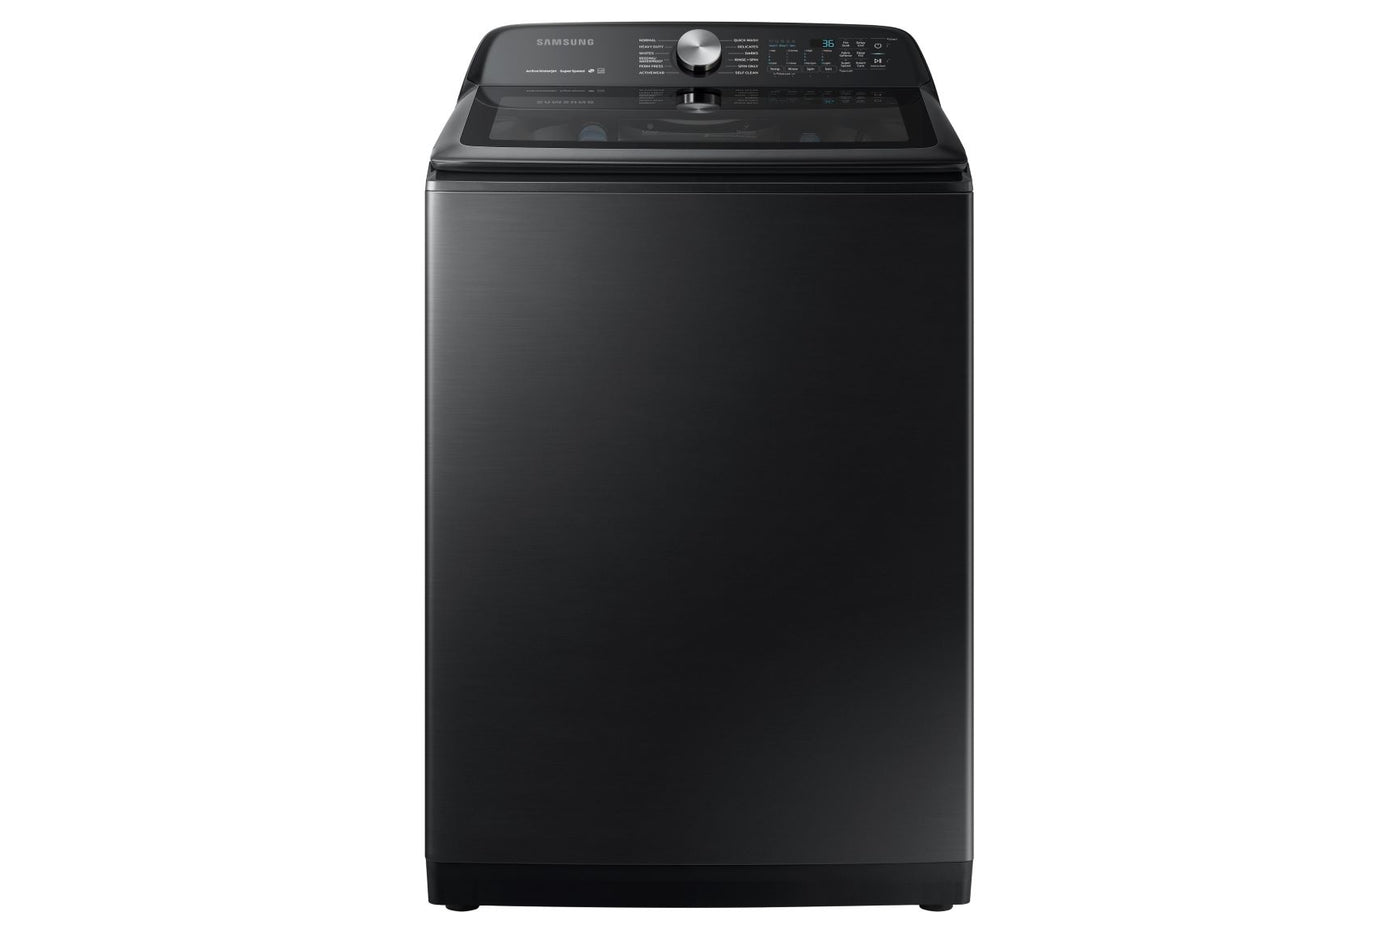 Samsung Black Stainless Top Load Washer with SuperSpeed and EZ Access Tub (5.8 Cu.Ft.) - WA50A5400AV/A4